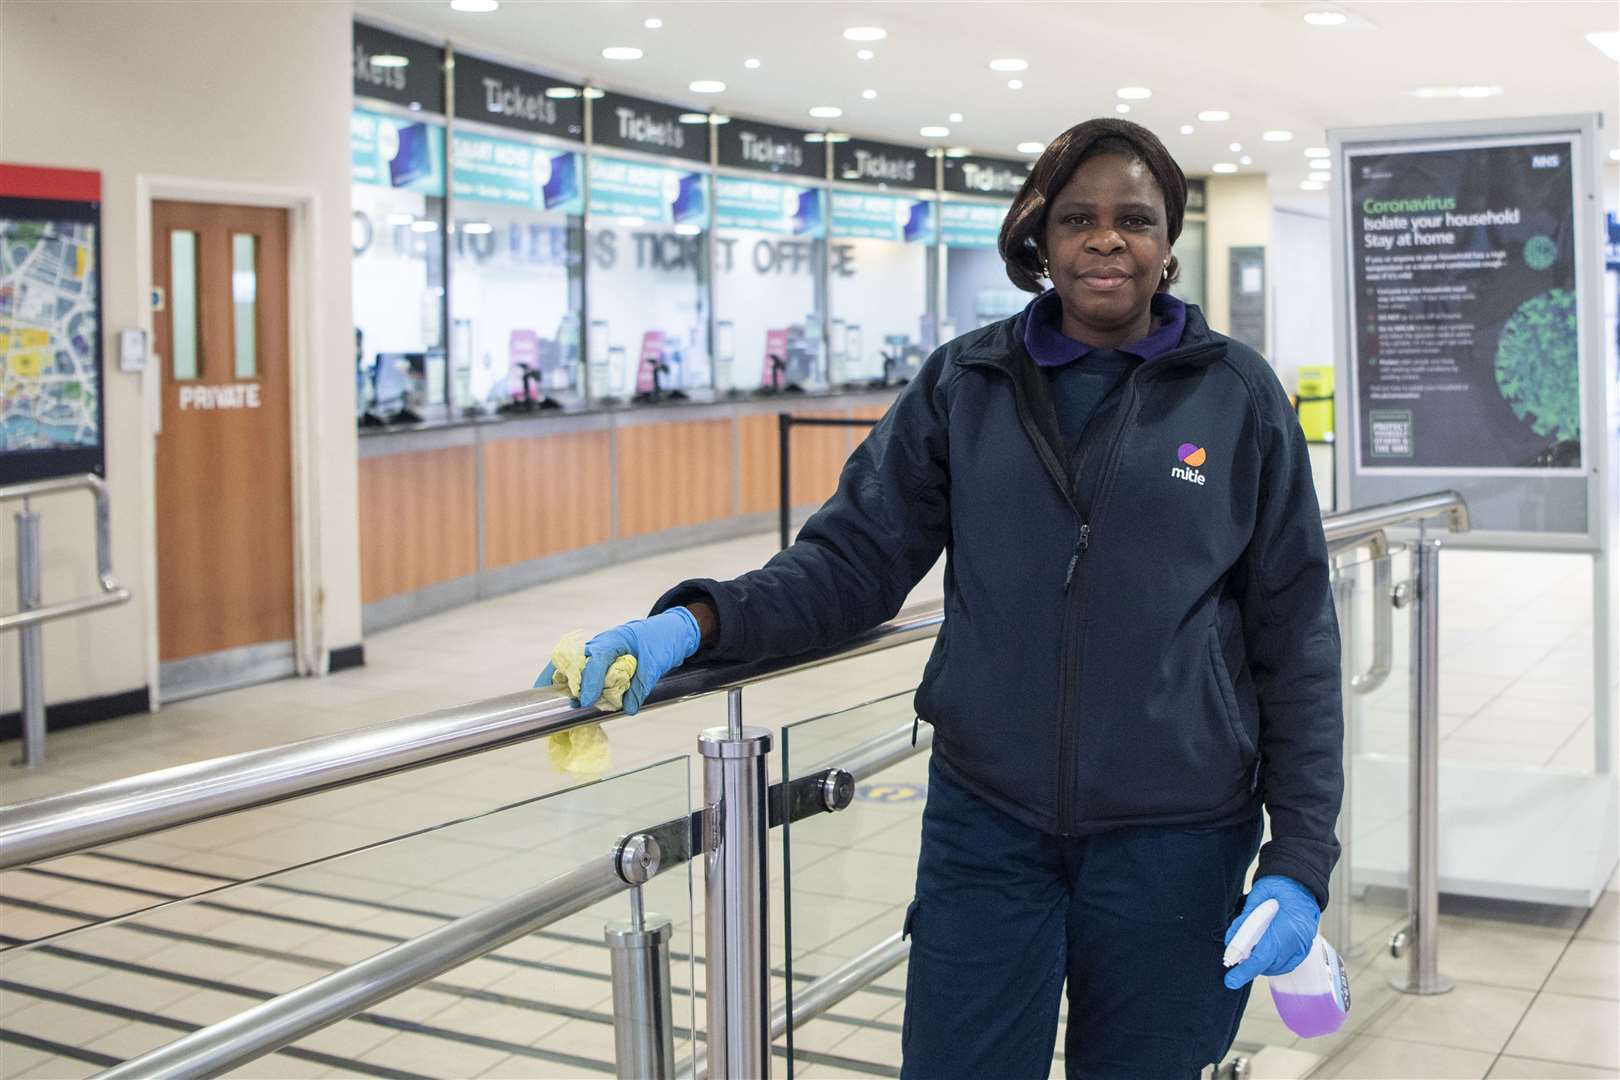 A Leeds train station cleaner by Samantha Toolsie (Samantha Toolsie/Historic England/PA)